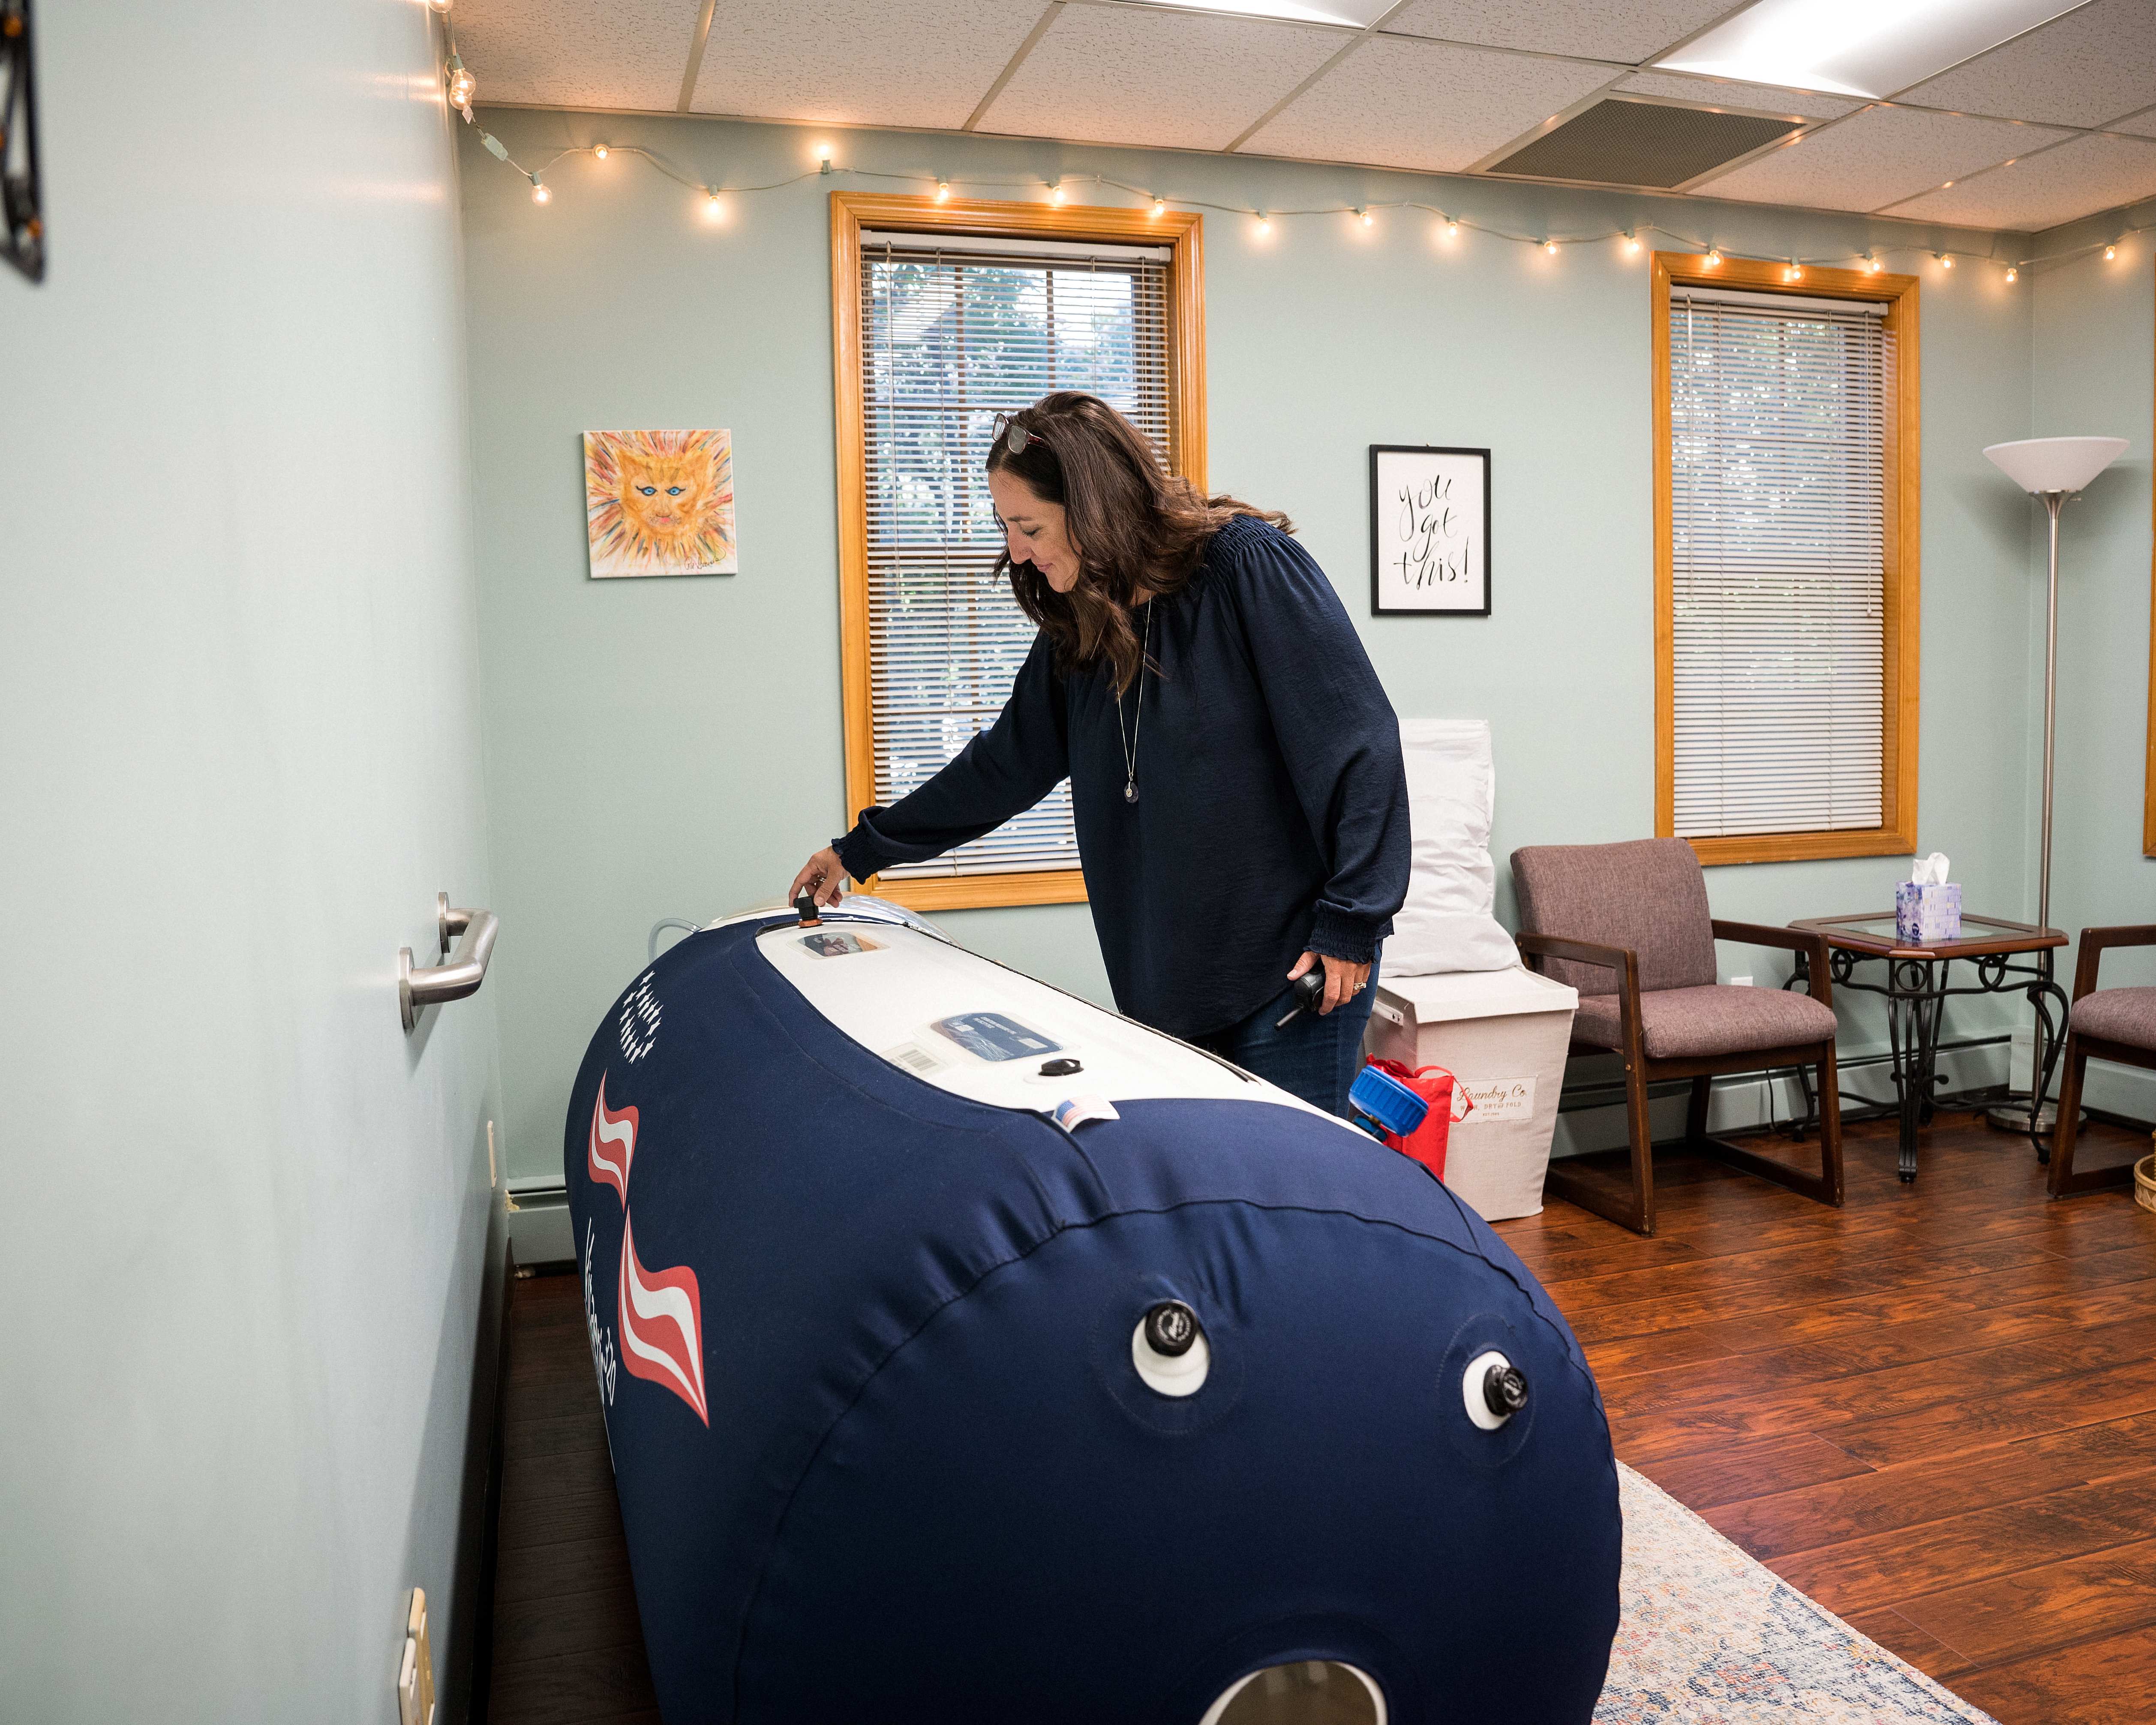 What is Hyperbaric oxygen therapy (HBOT)?